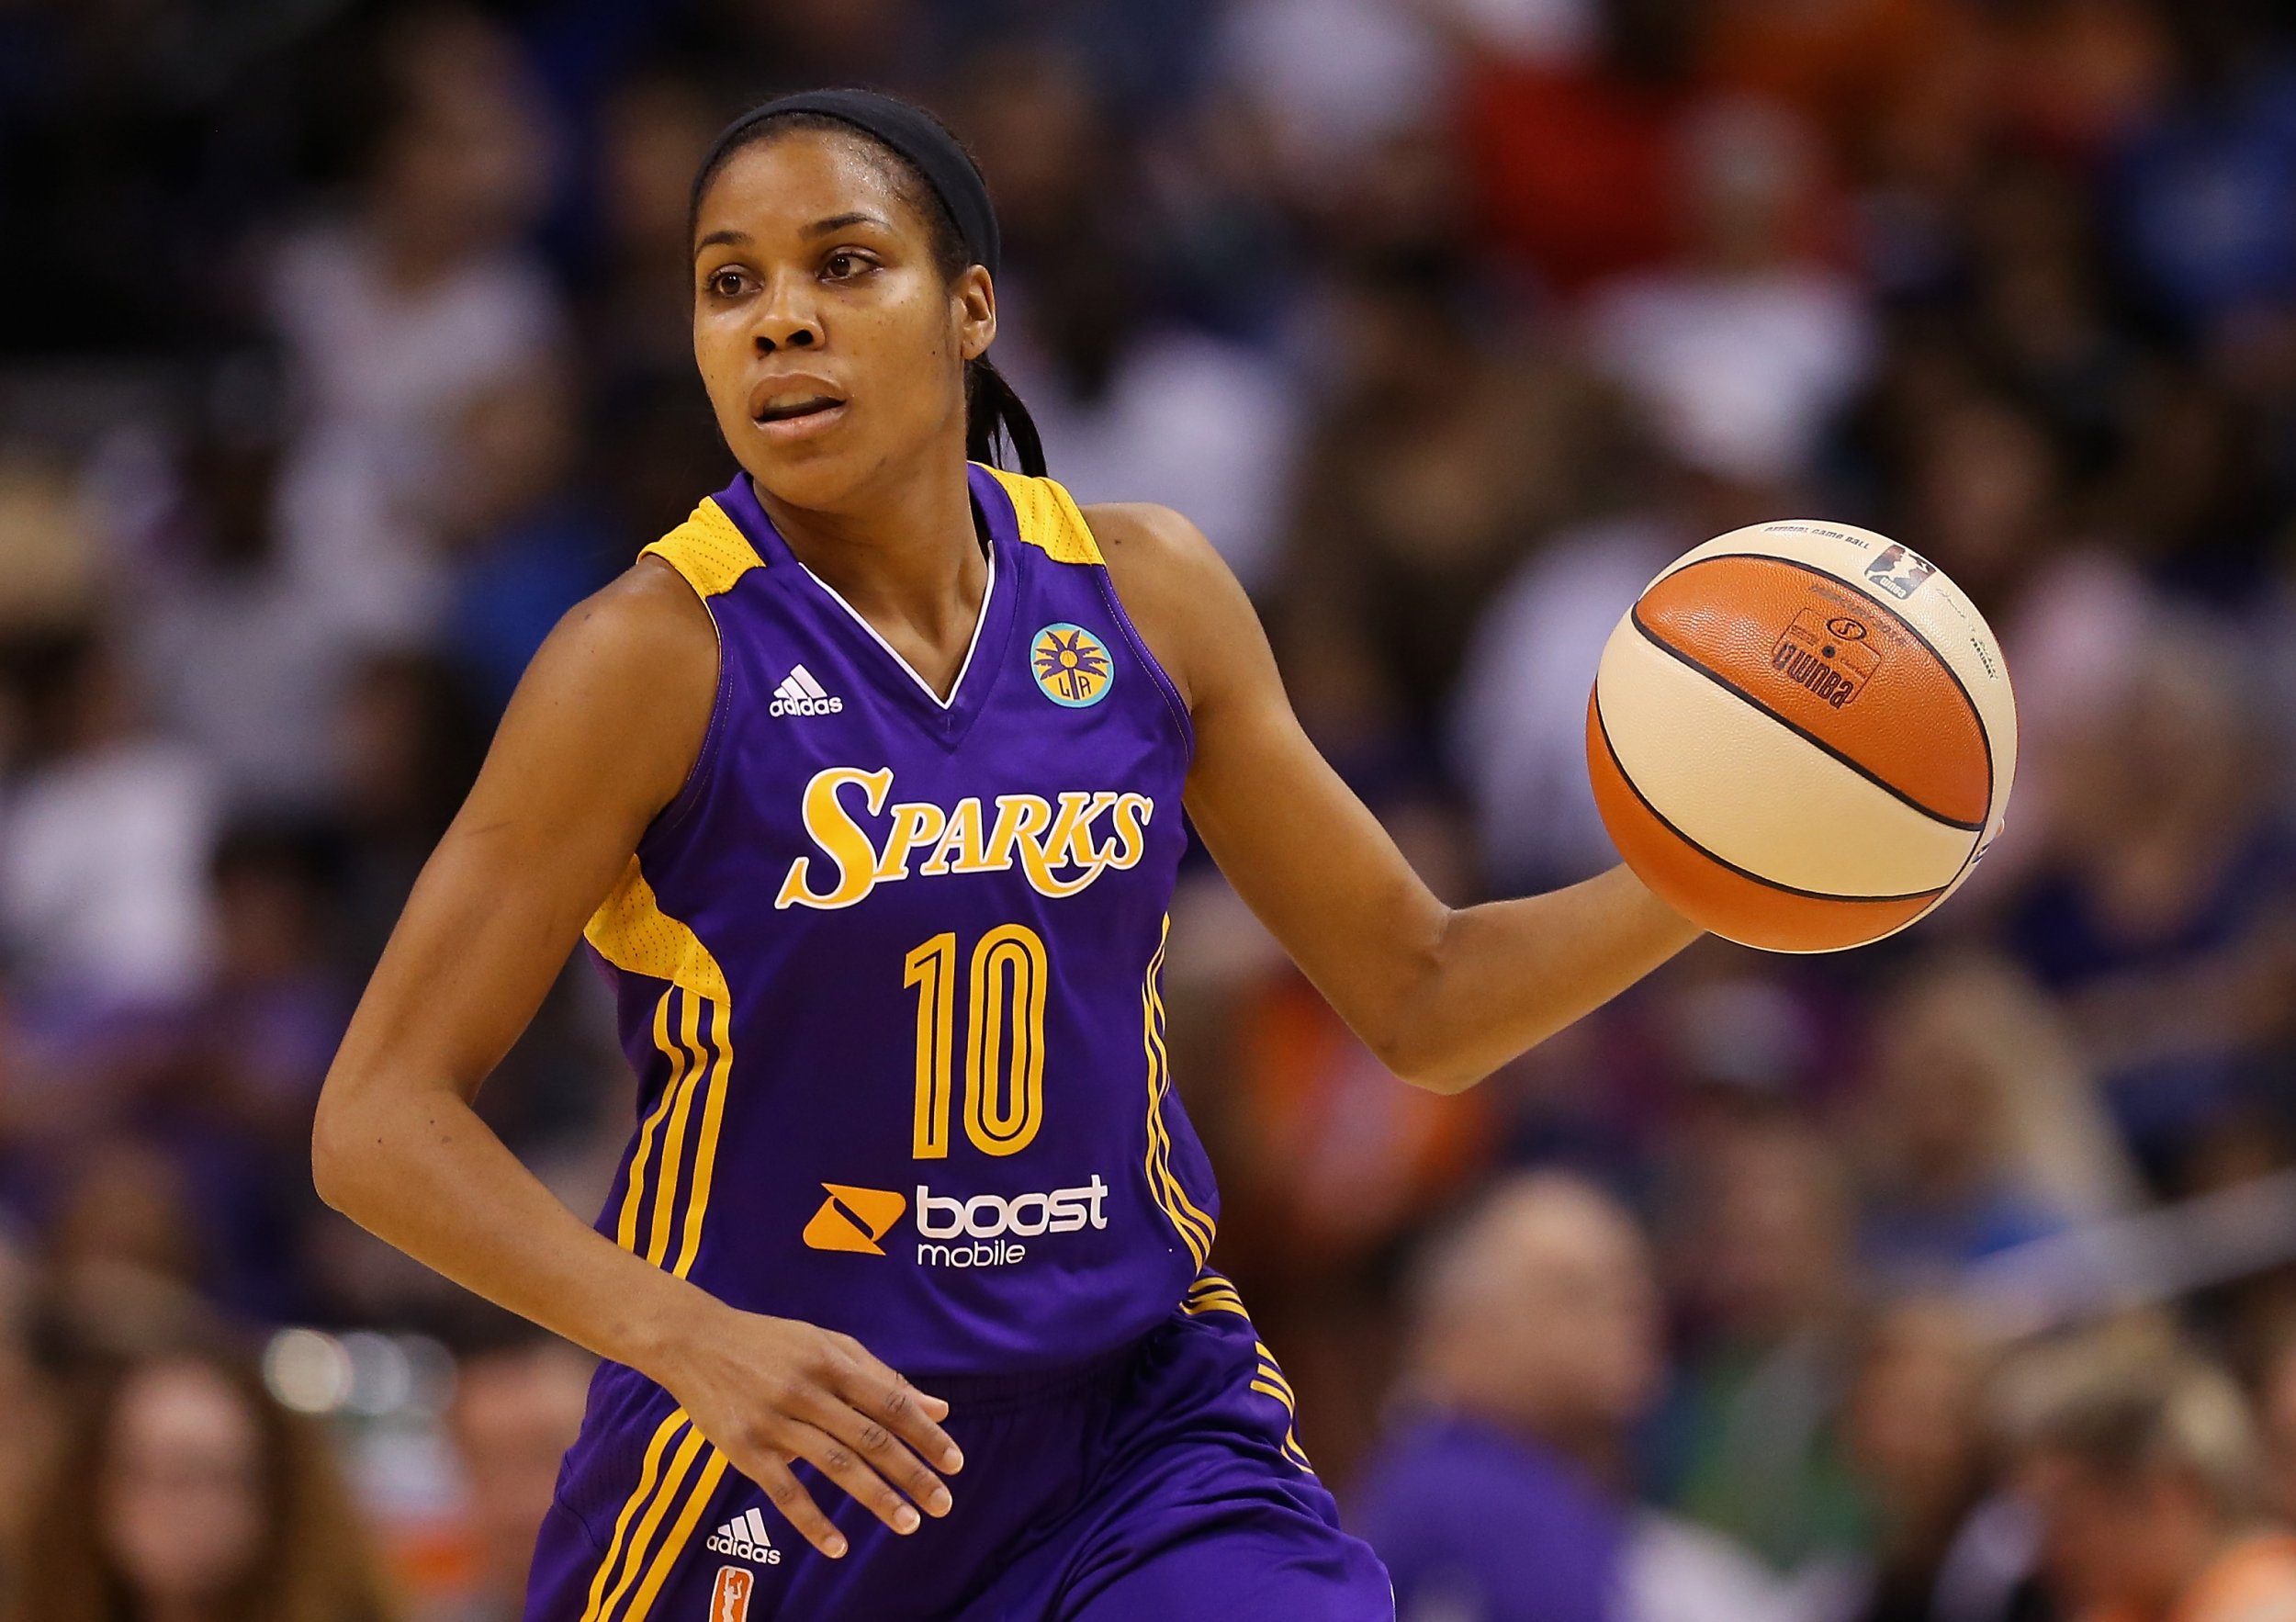 Sixers Hire Lindsey Harding, First Female Coach In Franchise's History